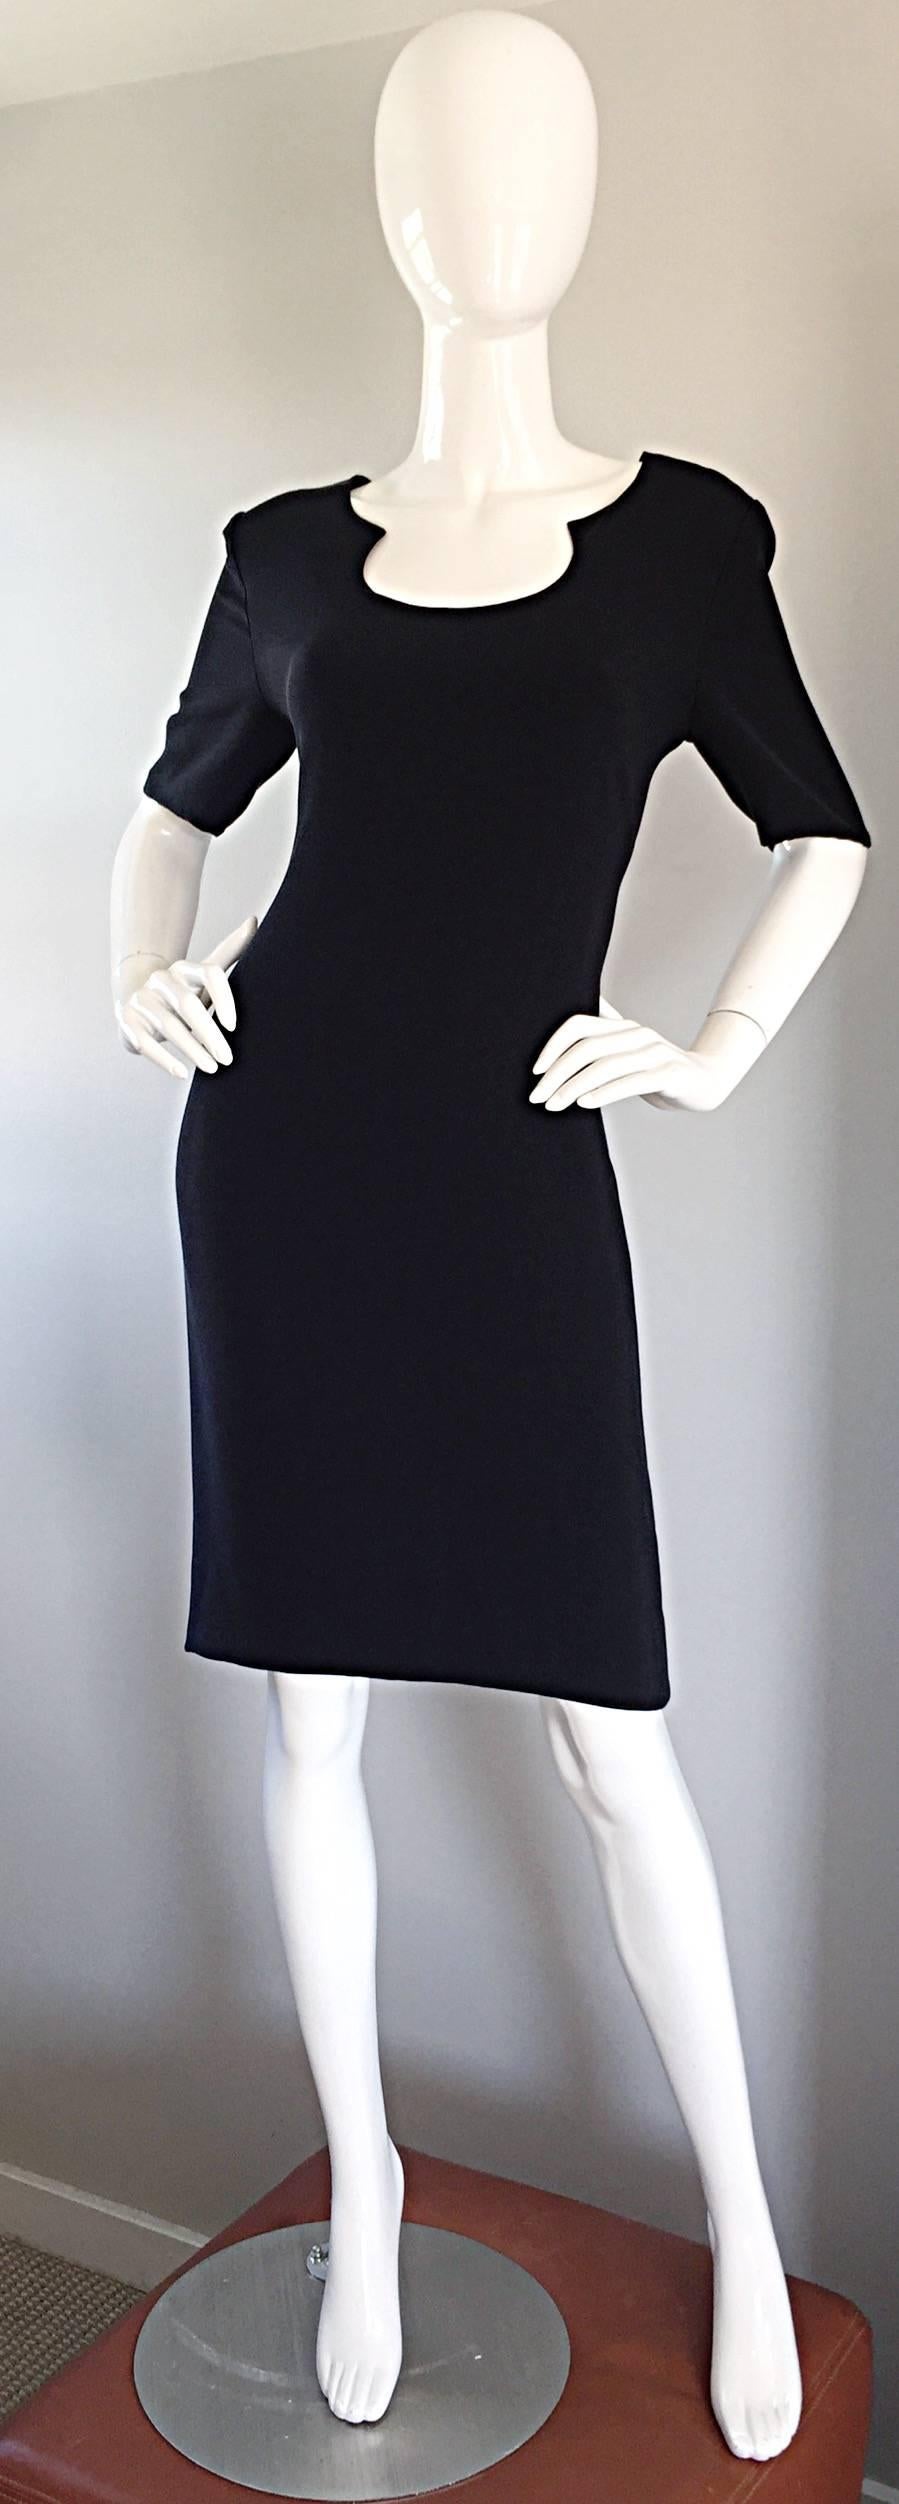 Perfect vintage BILL BLASS little black dress! Double faced jersey, that hugs the body in all the right places...stretches to fit. Flattering neckline, with short half sleeves that hit just at the elbow. Hidden zipper up the back, with hook-and-eye